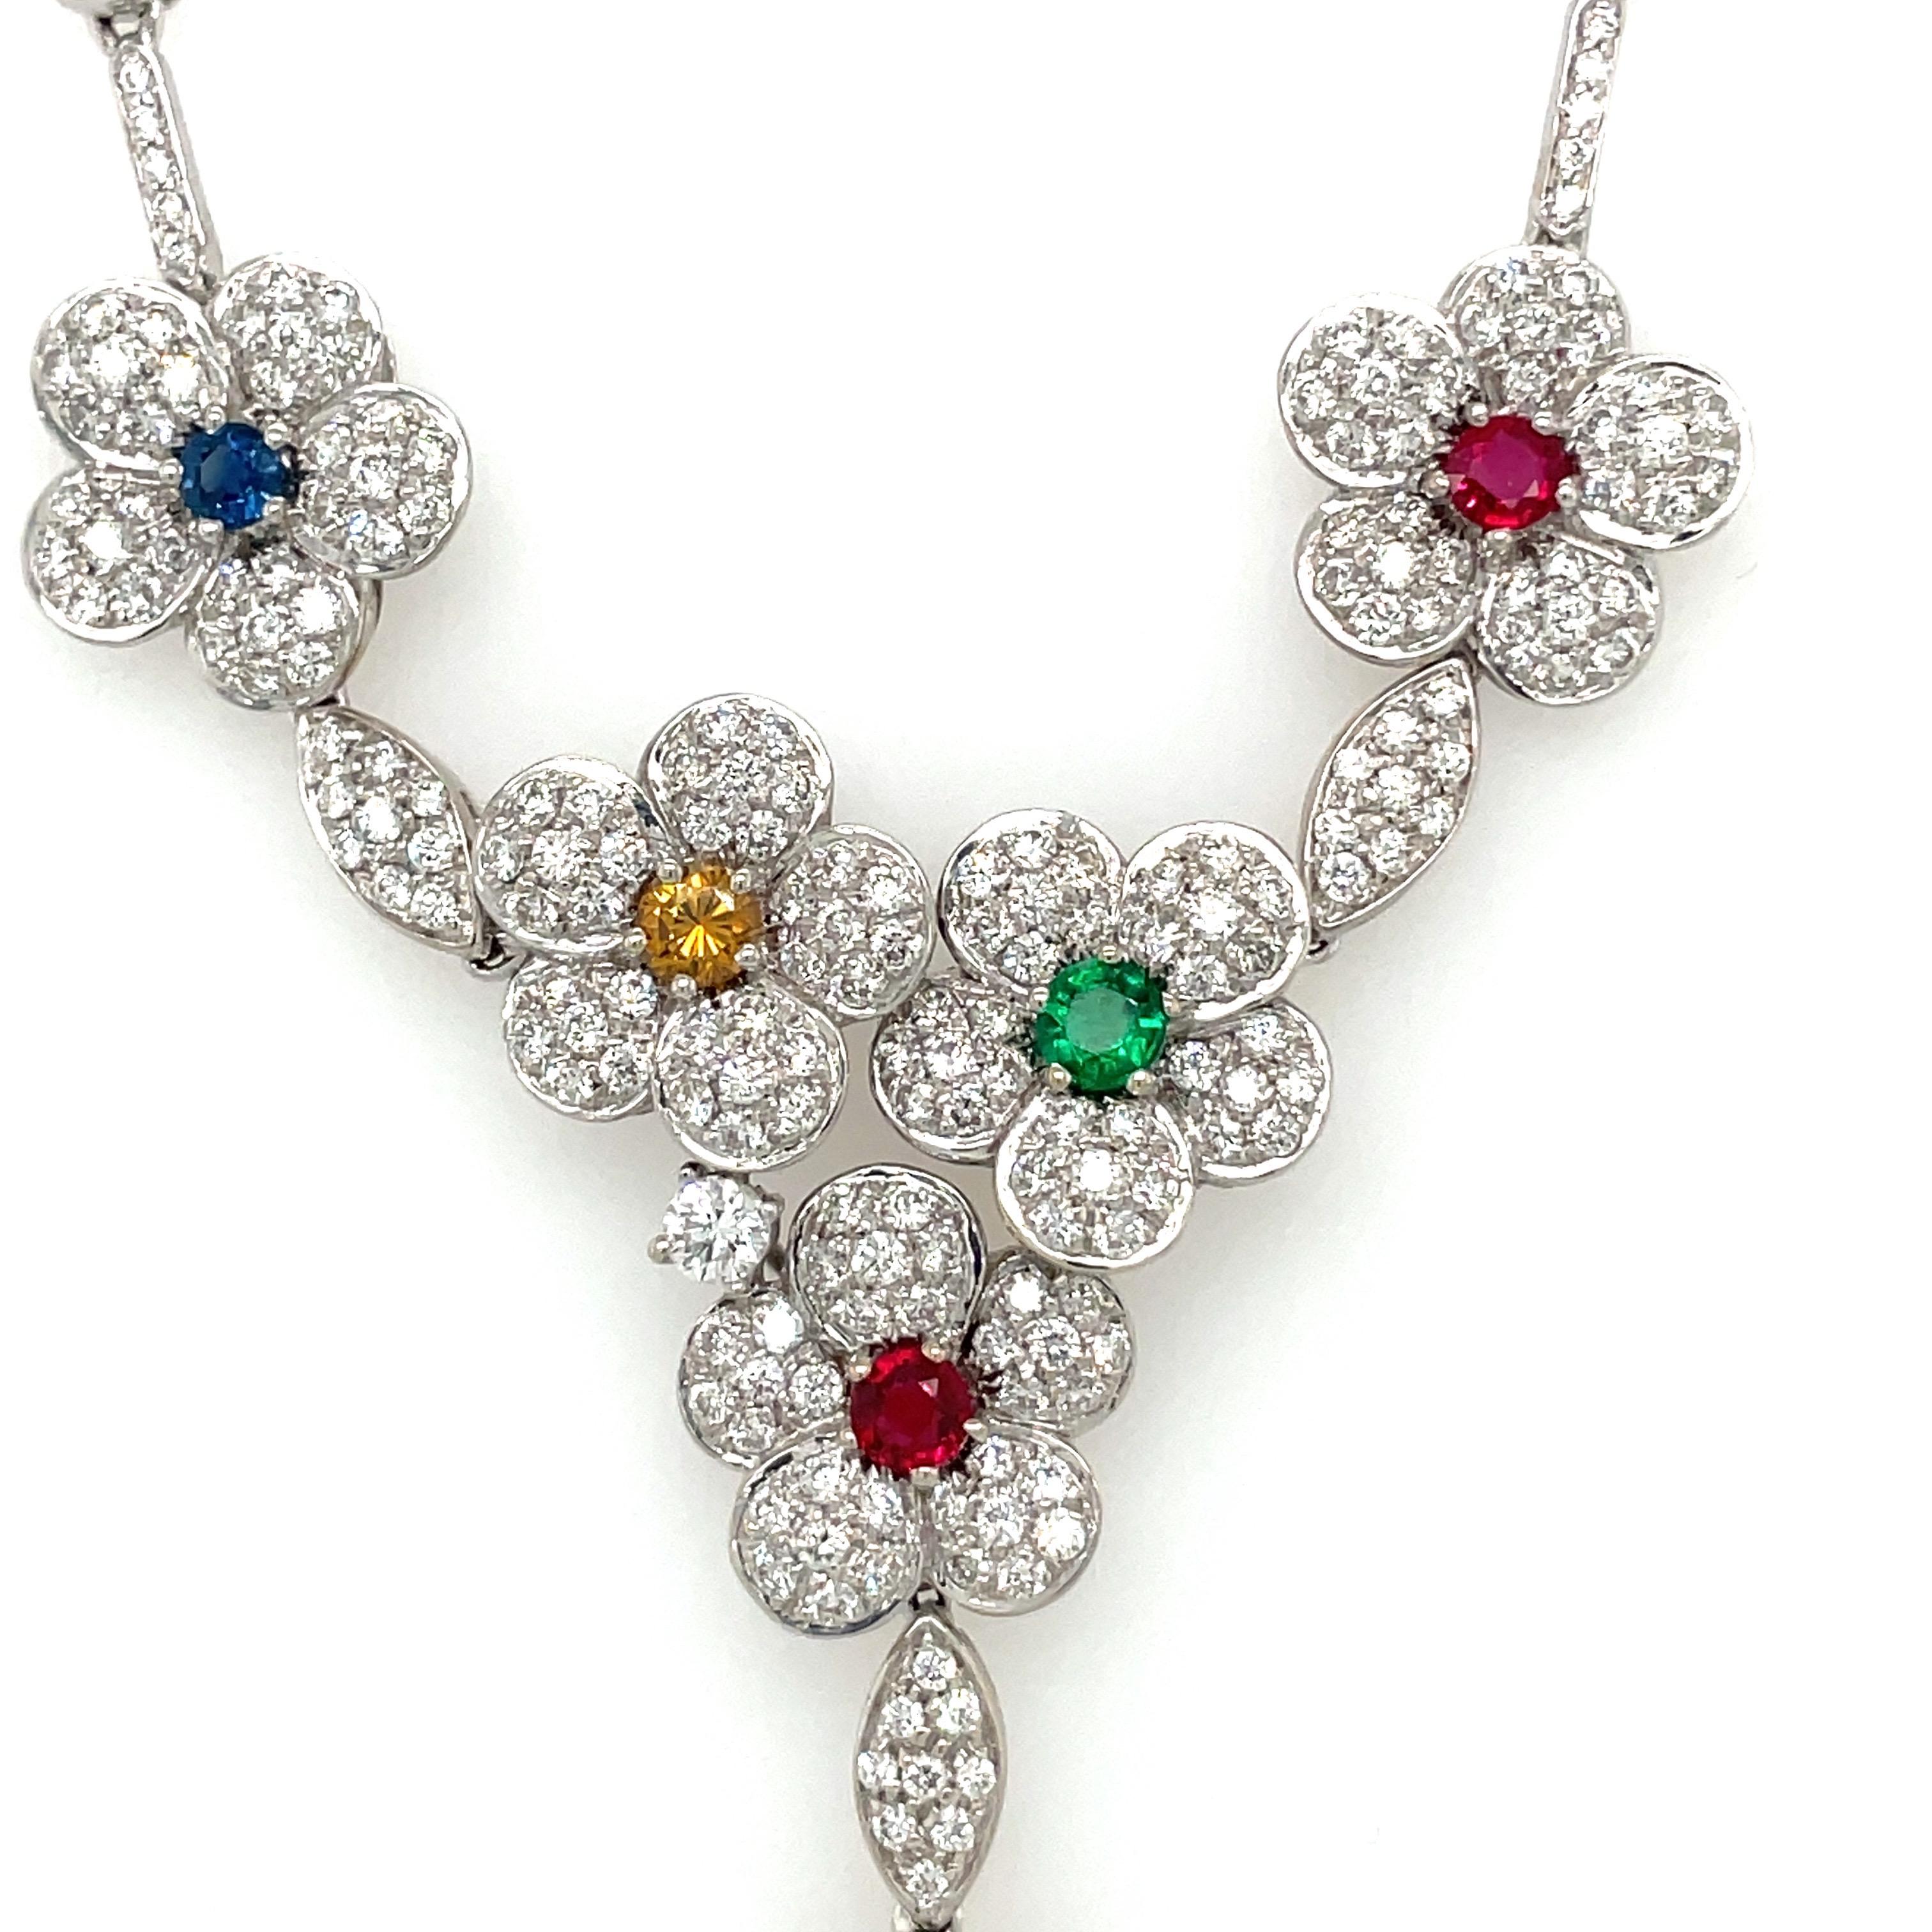 This show-stopping necklaces showcases 6 beautiful diamonds flowers with ruby, emerald, blue and yellow sapphire center stones set in 18 karat white gold. Measuring at about 16